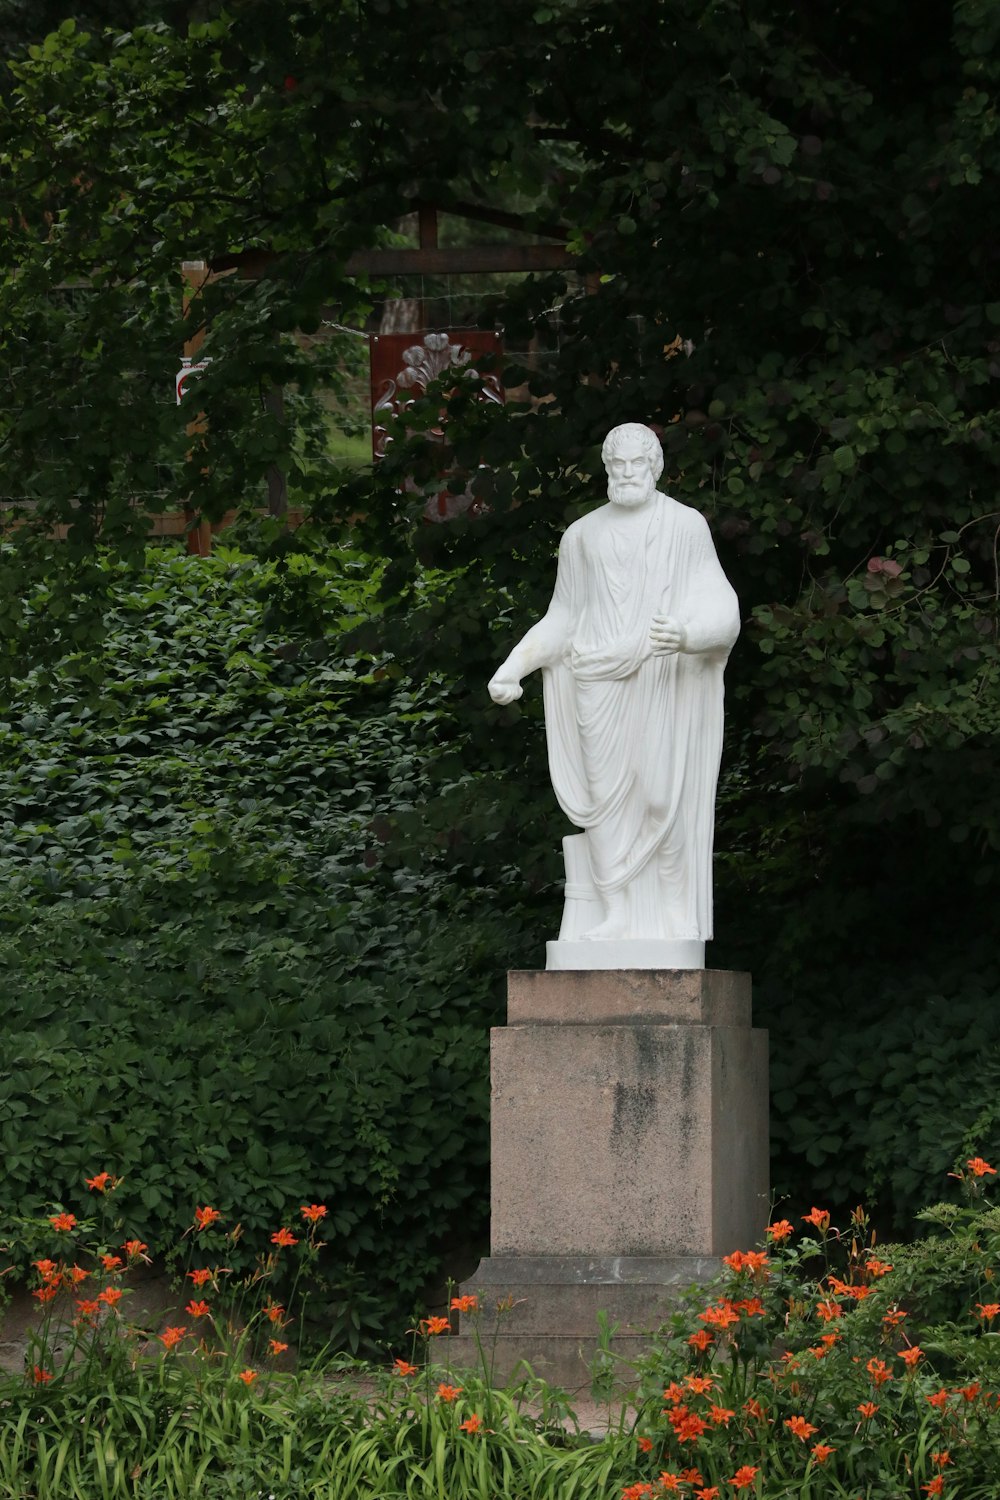 a statue of a person with a robe on